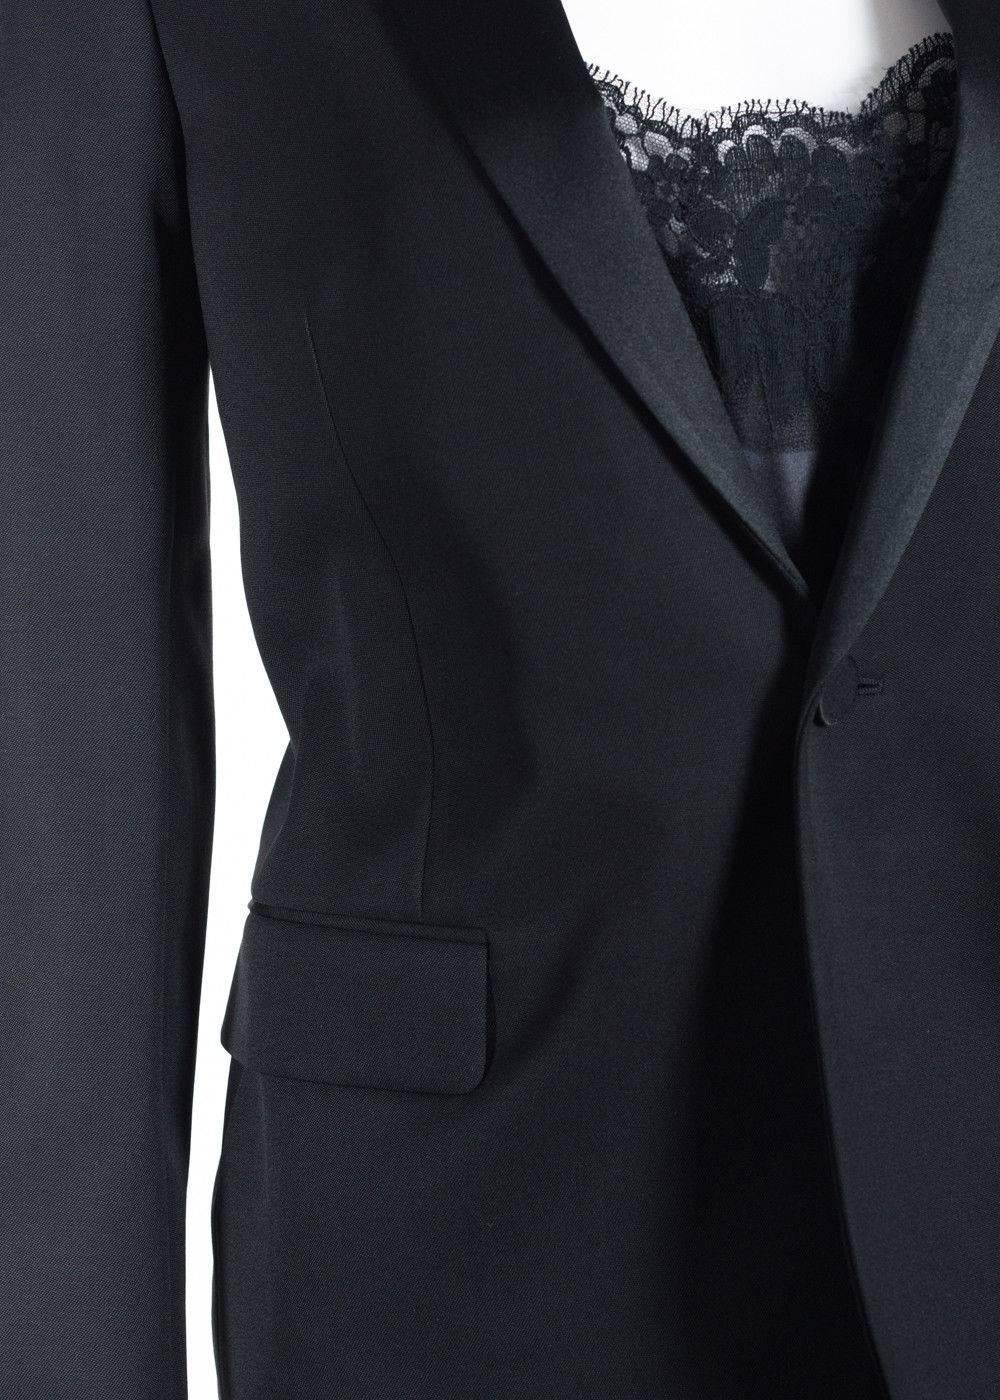 Brand New With Tags
Retails Online and In-stores for $3490
Size EUR 36 / US 4 Fits True to Size


Top your ensemble off with the unforgettable Saint Laurent Tuxedo Jacket. This amazingly tailored jacket is made off rich wool crepe and silk for the